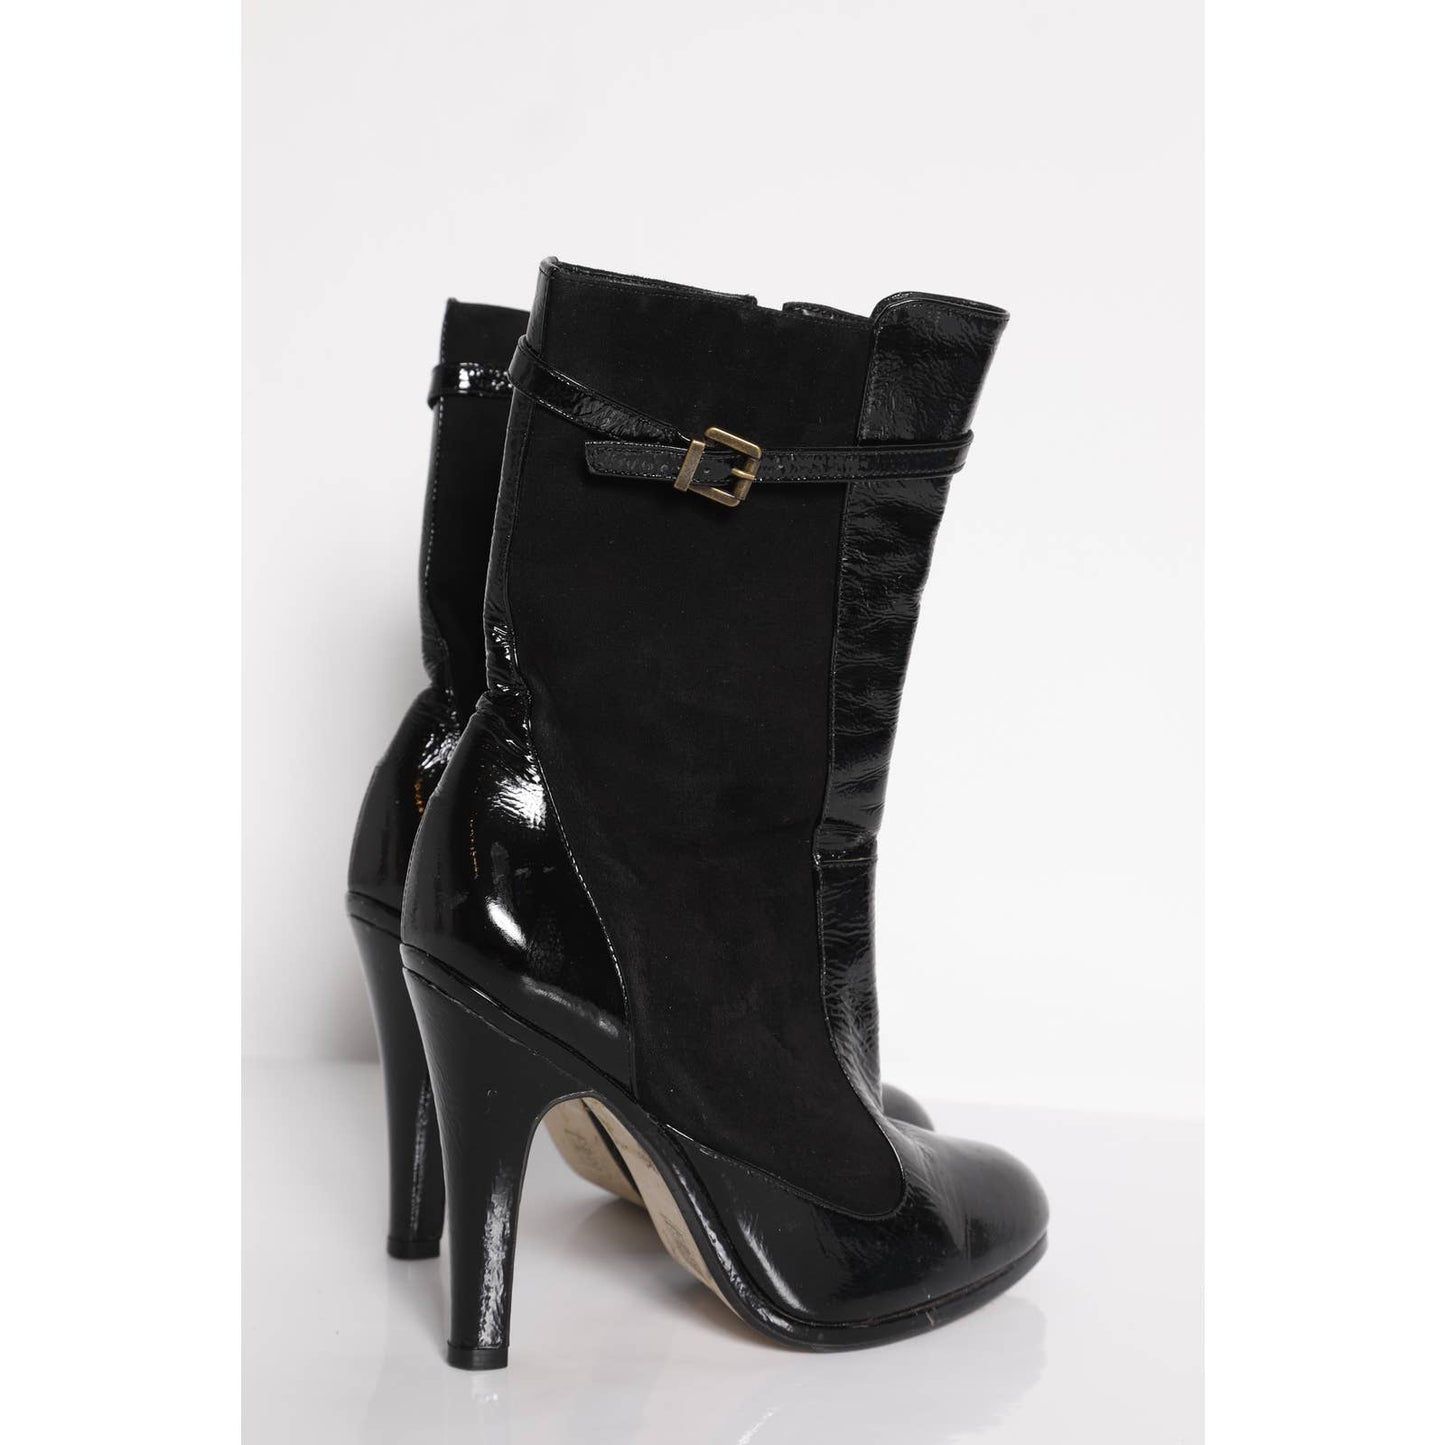 TOPSHOP Black High Heel Leather and Suede Ankle Boots